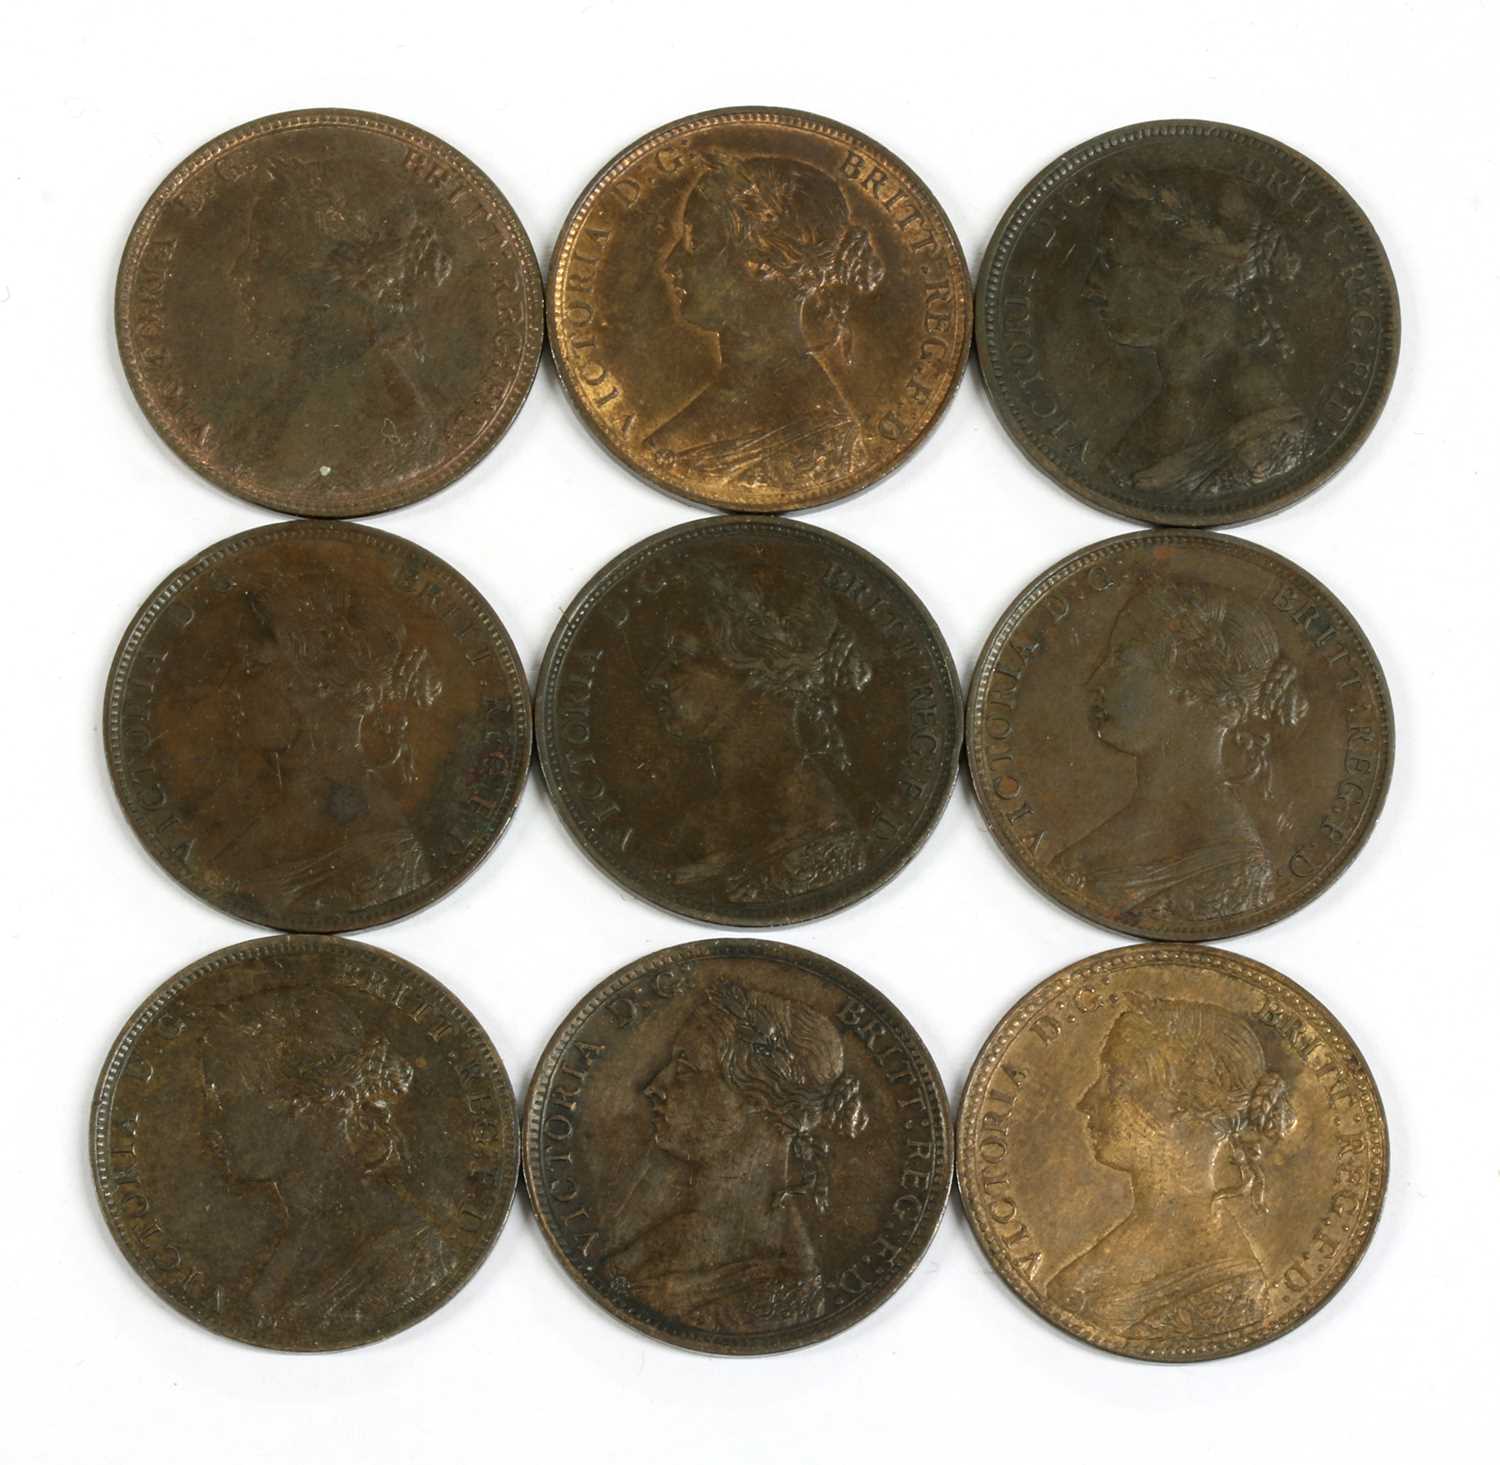 Coins, Great Britain, Victoria (1837-1901), - Image 4 of 4